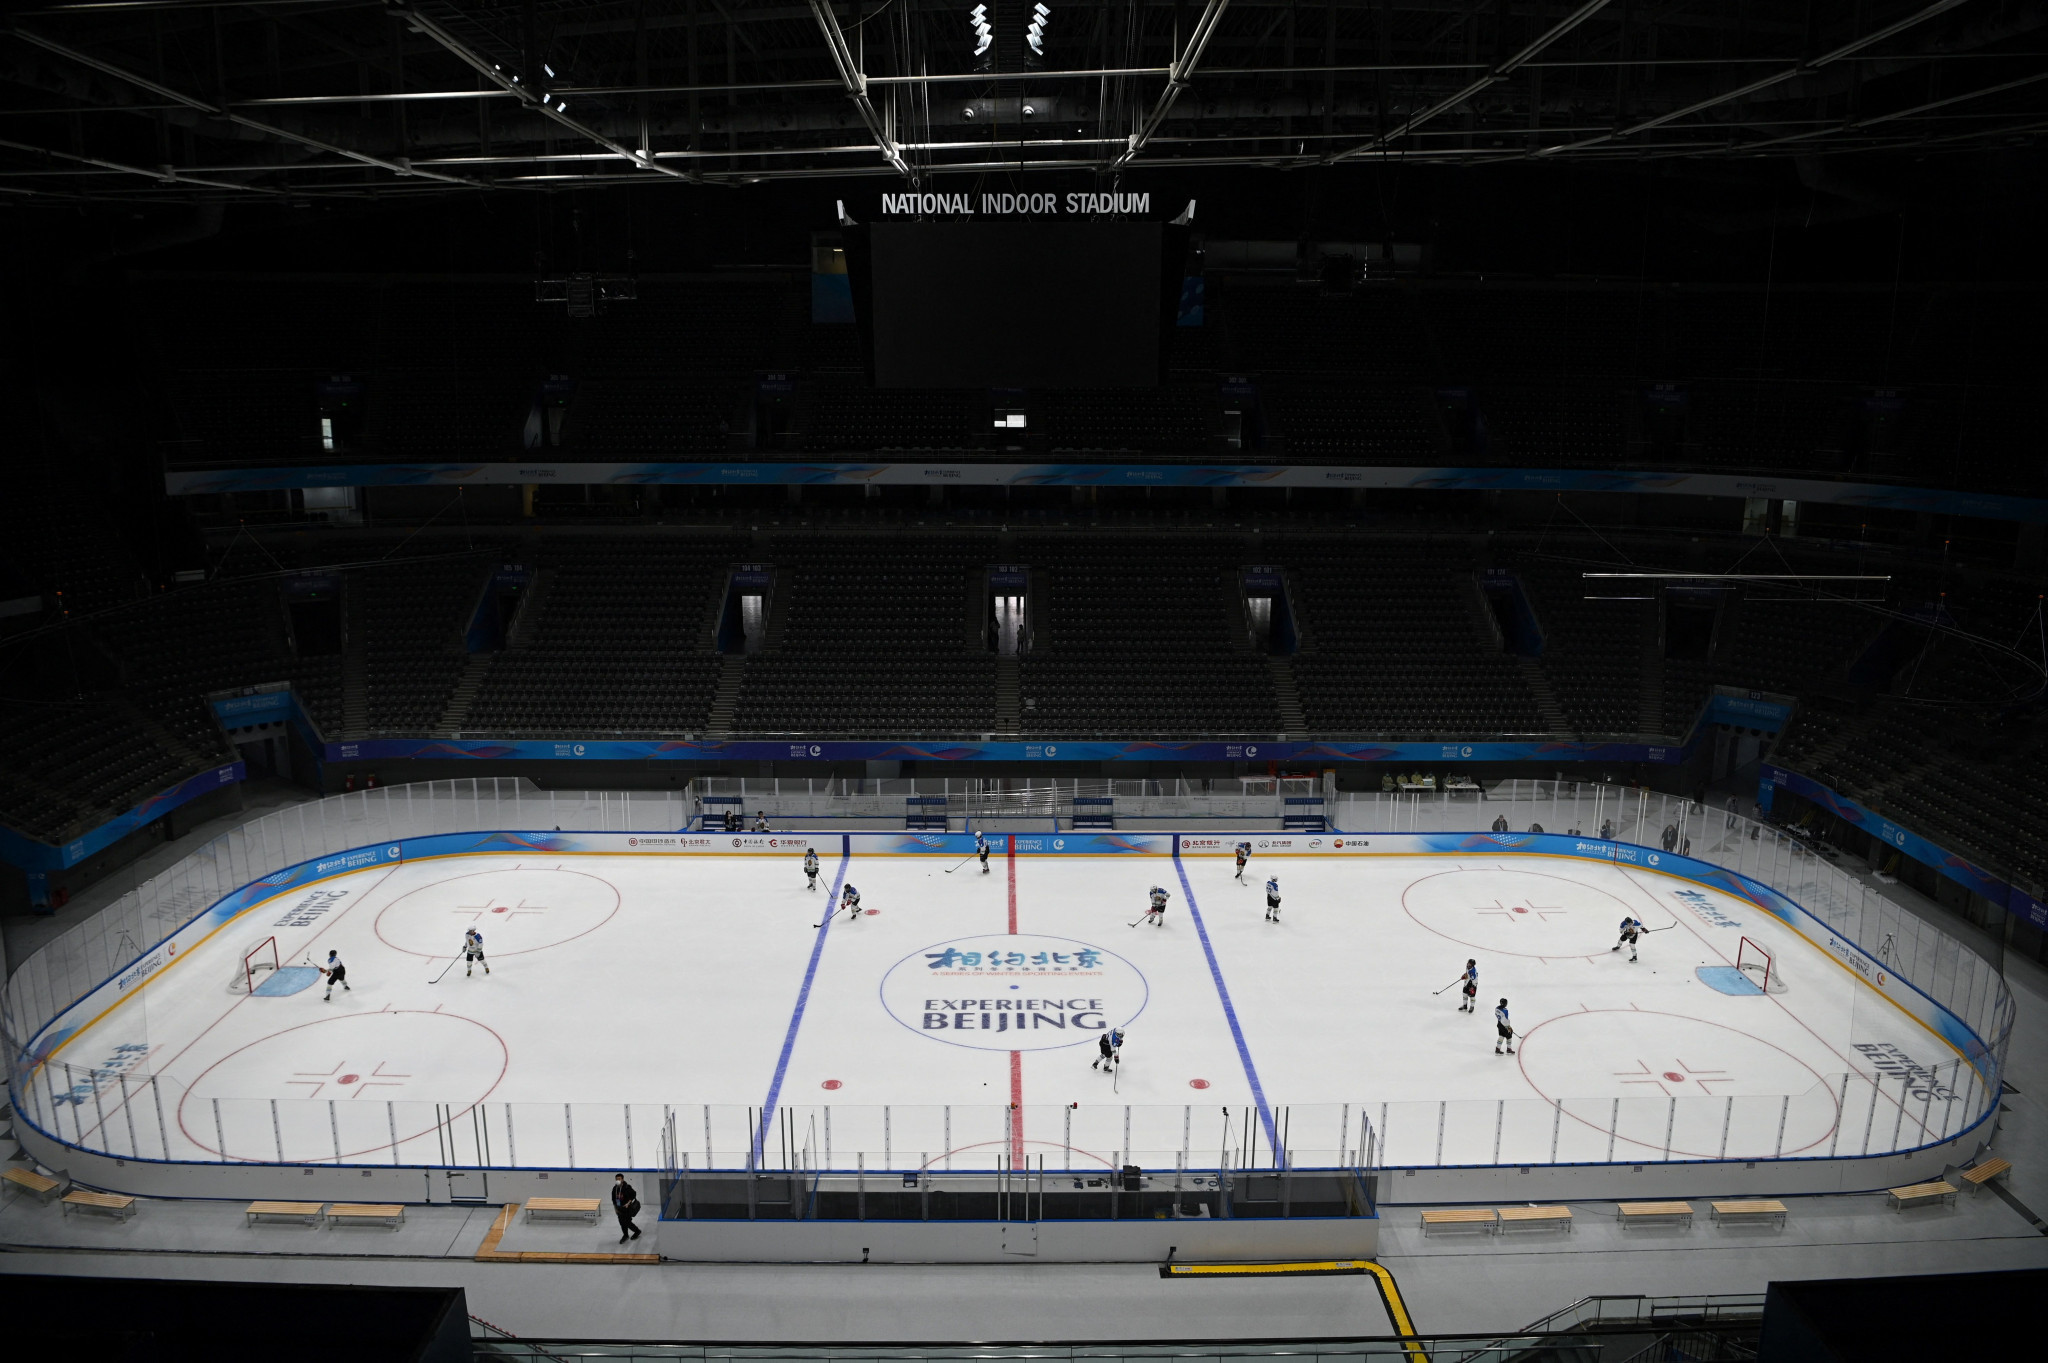 The ROC team are in Group B of the men's ice hockey tournament at Beijing 2022 alongside the Czech Republic, Switzerland and Denmark 
©Getty Images